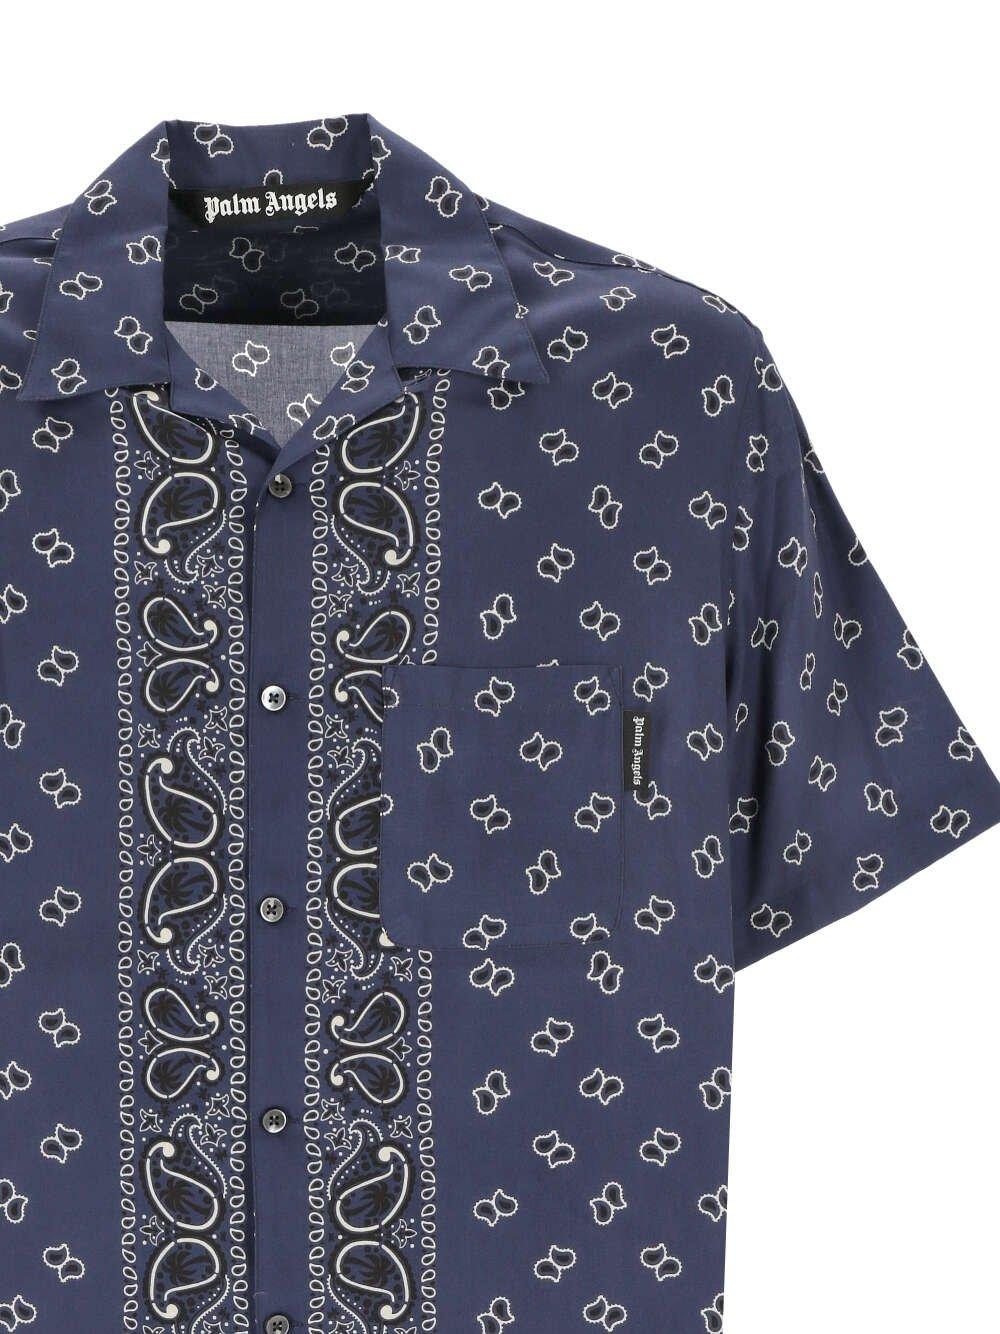 Shop Palm Angels Paisley Printed Bowling Shirt In Navy Blue Navy Blue